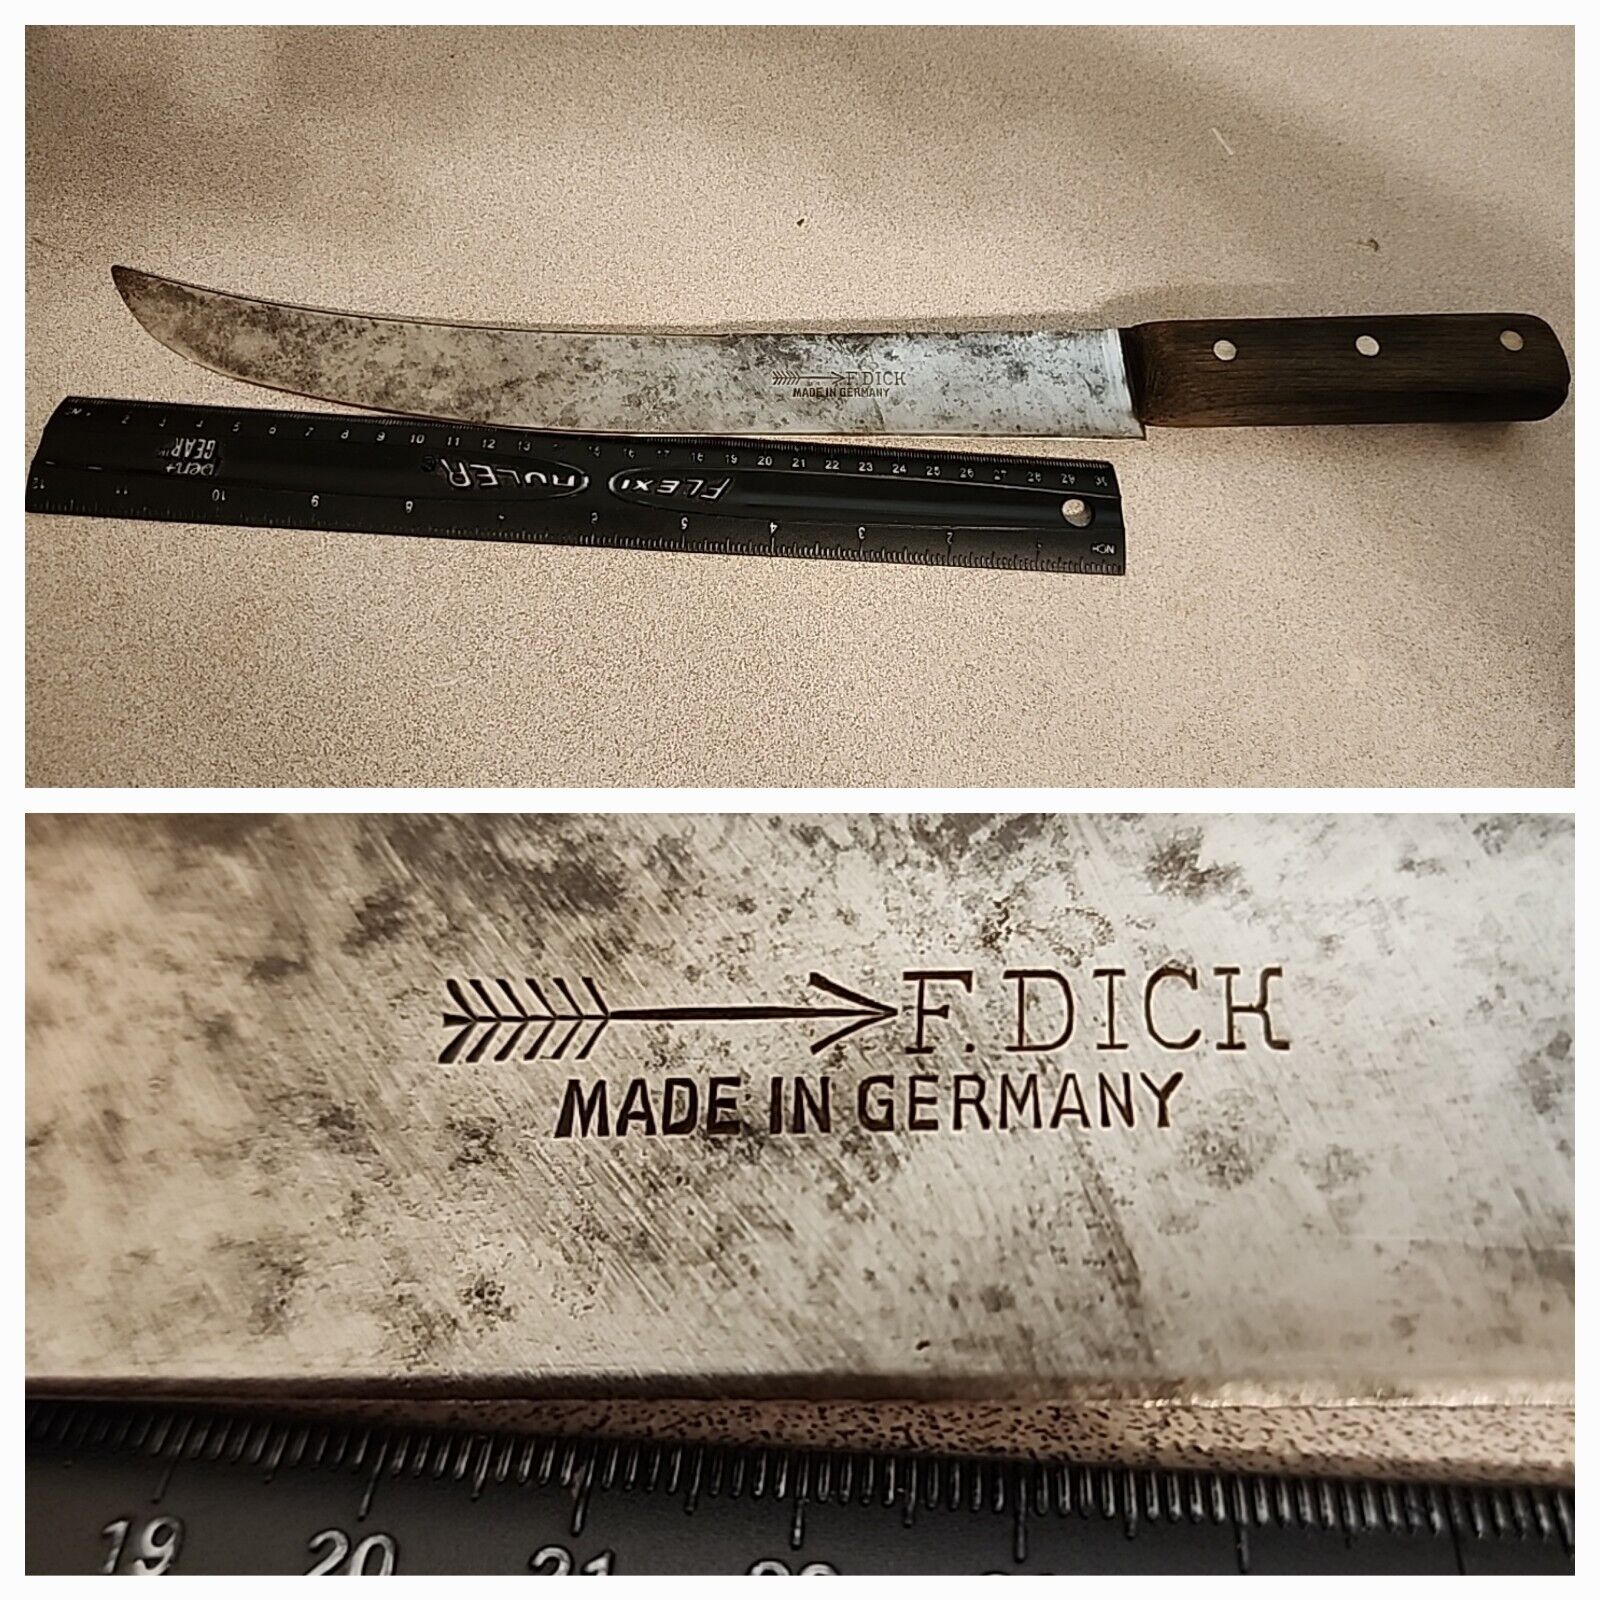 Vtg F. DICK MADE IN GERMANY CARBON STEEL 12 1/4